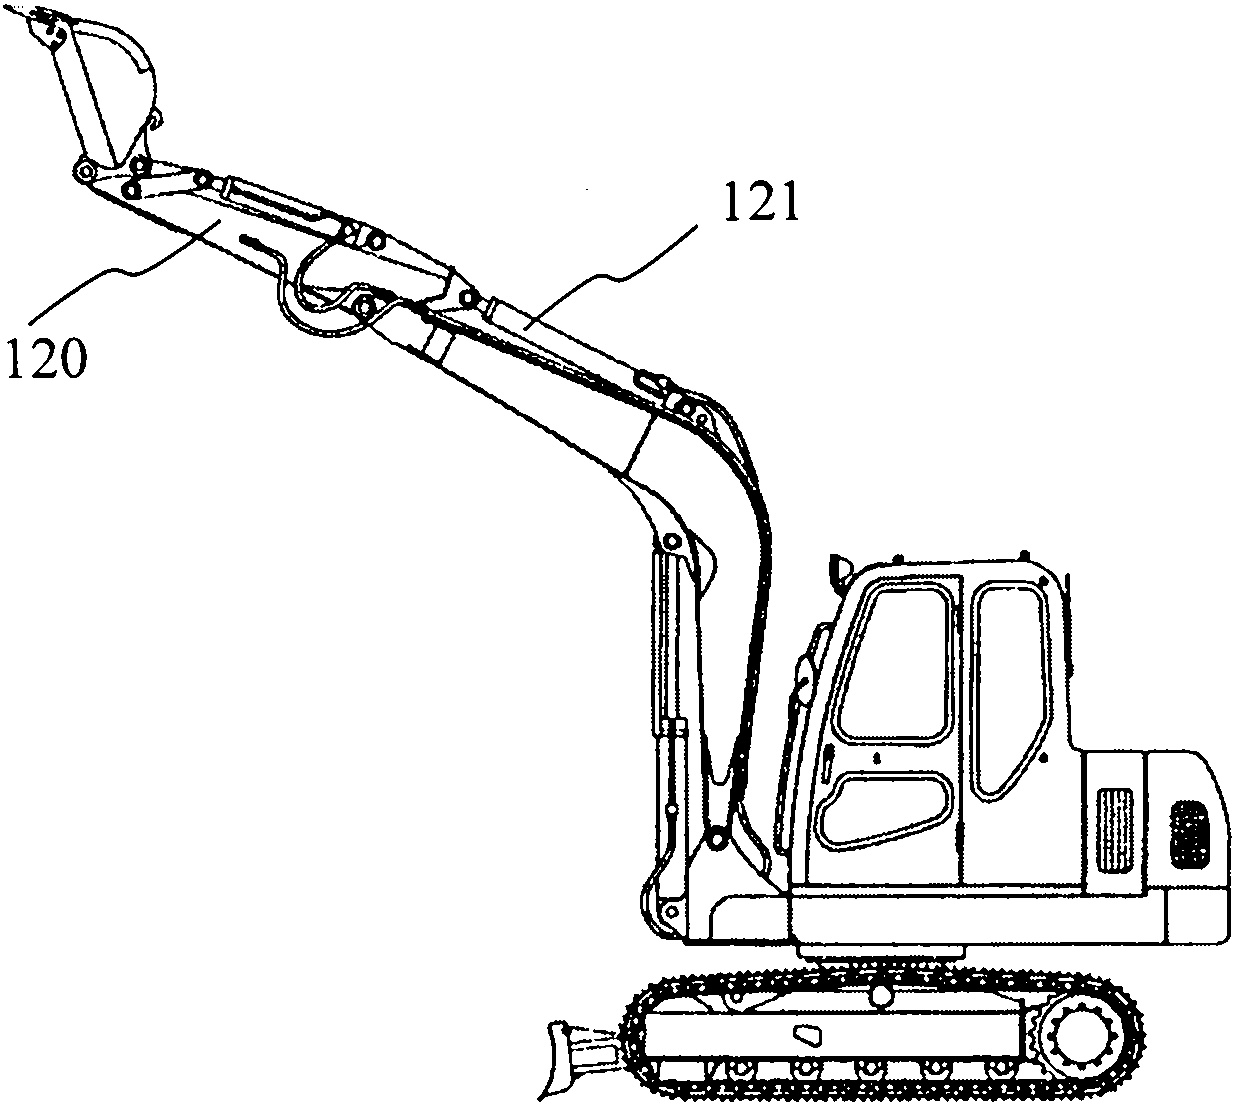 Excavator and hydraulic system for bucket arm of excavator